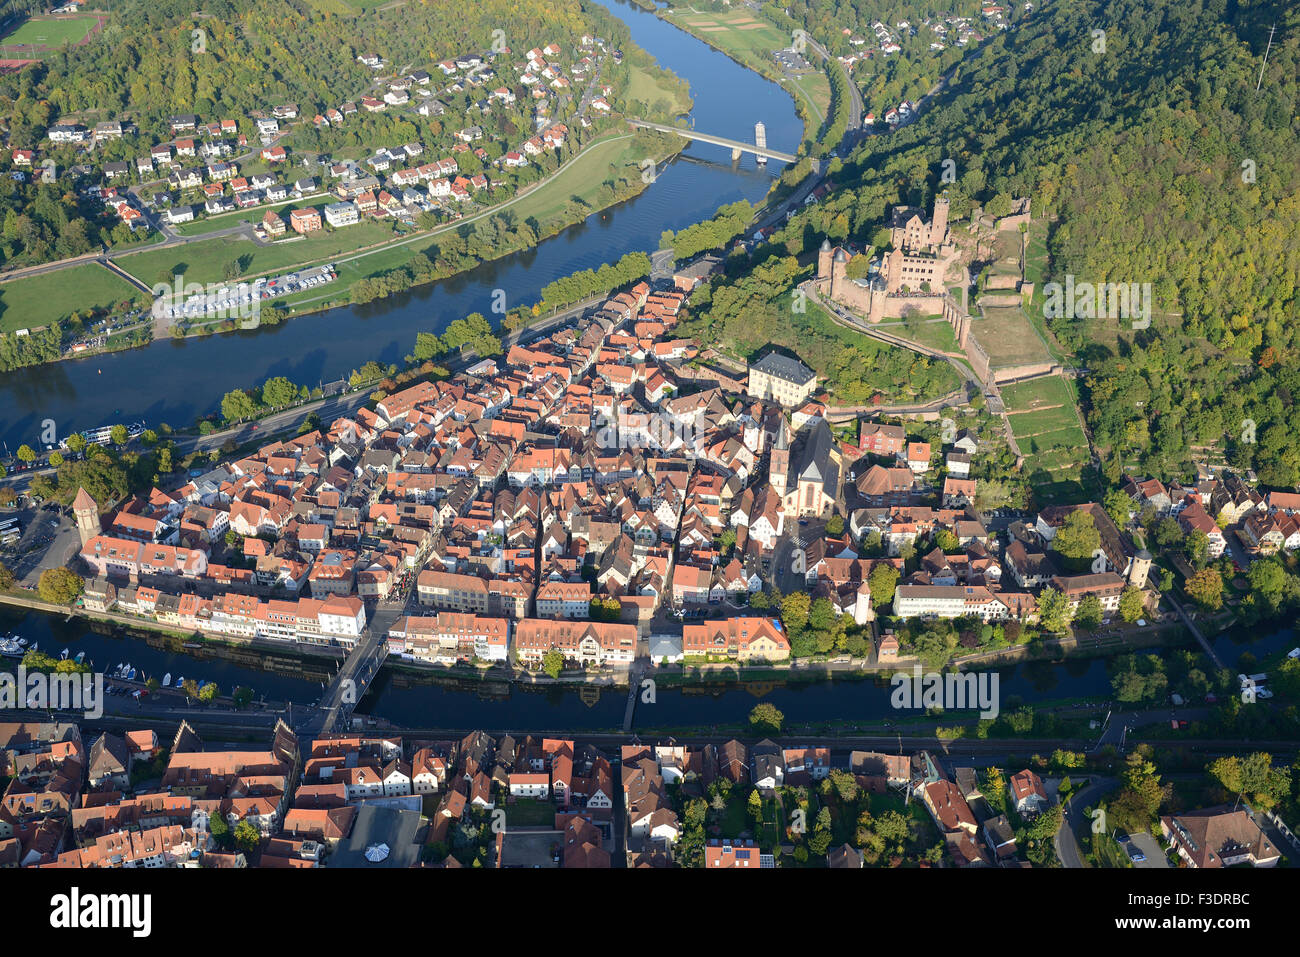 AERIAL VIEW. Medieval town at the confluence of the Main (on the left) and Tauber Rivers. Wertheim am Main, Baden-Württemberg, Germany. Stock Photo